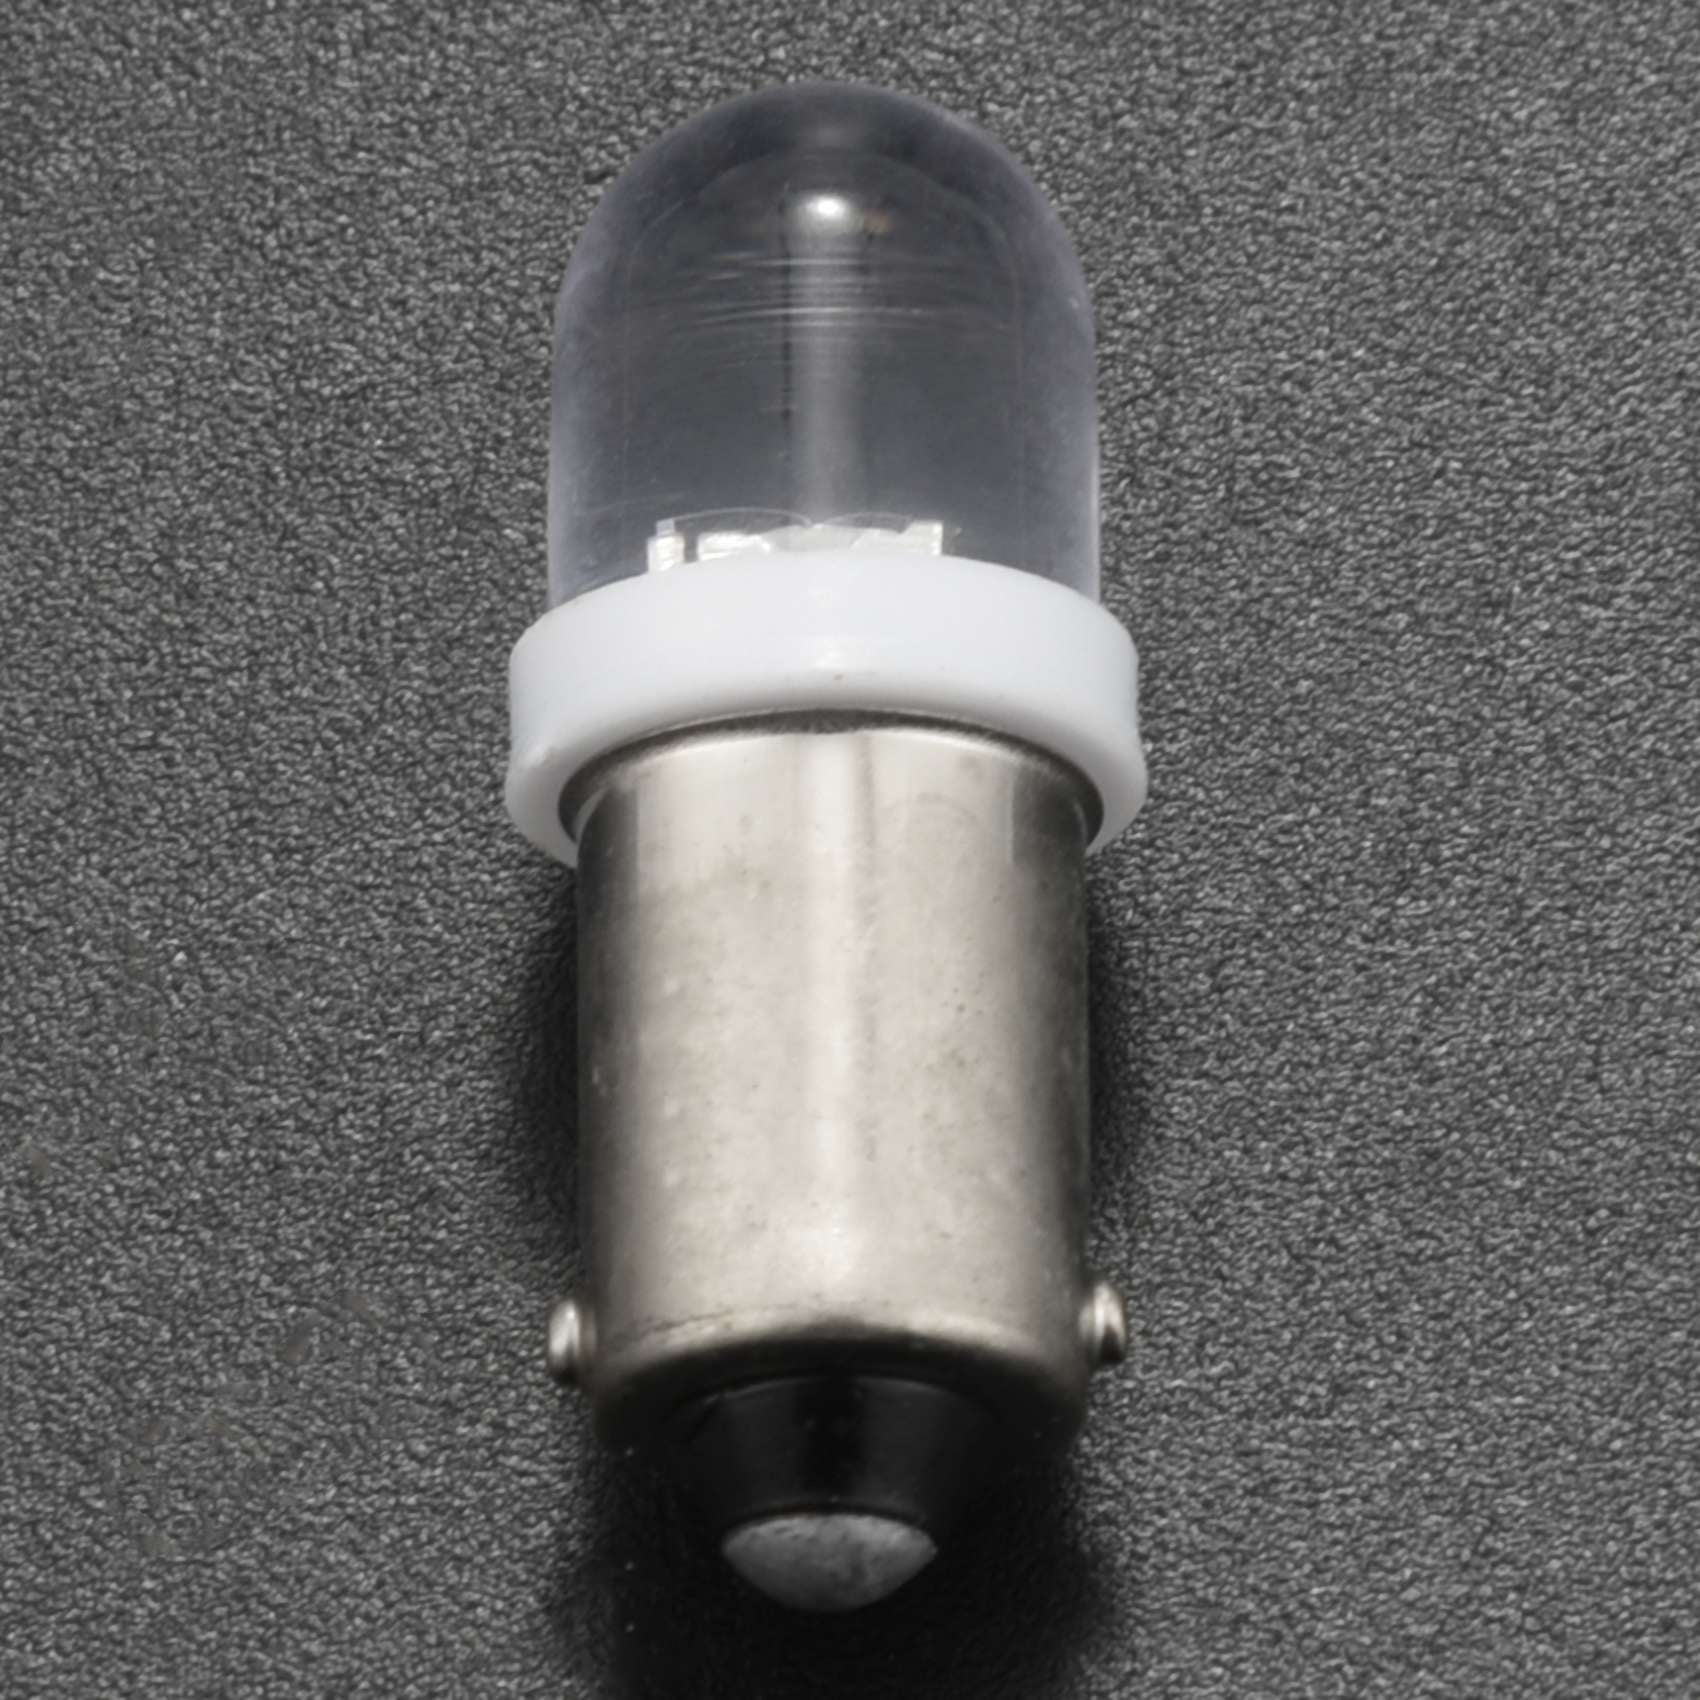 Replacement for Light Bulb / Lamp Jc BA9S 12V 5W Replacement Light Bulb  Lamp 